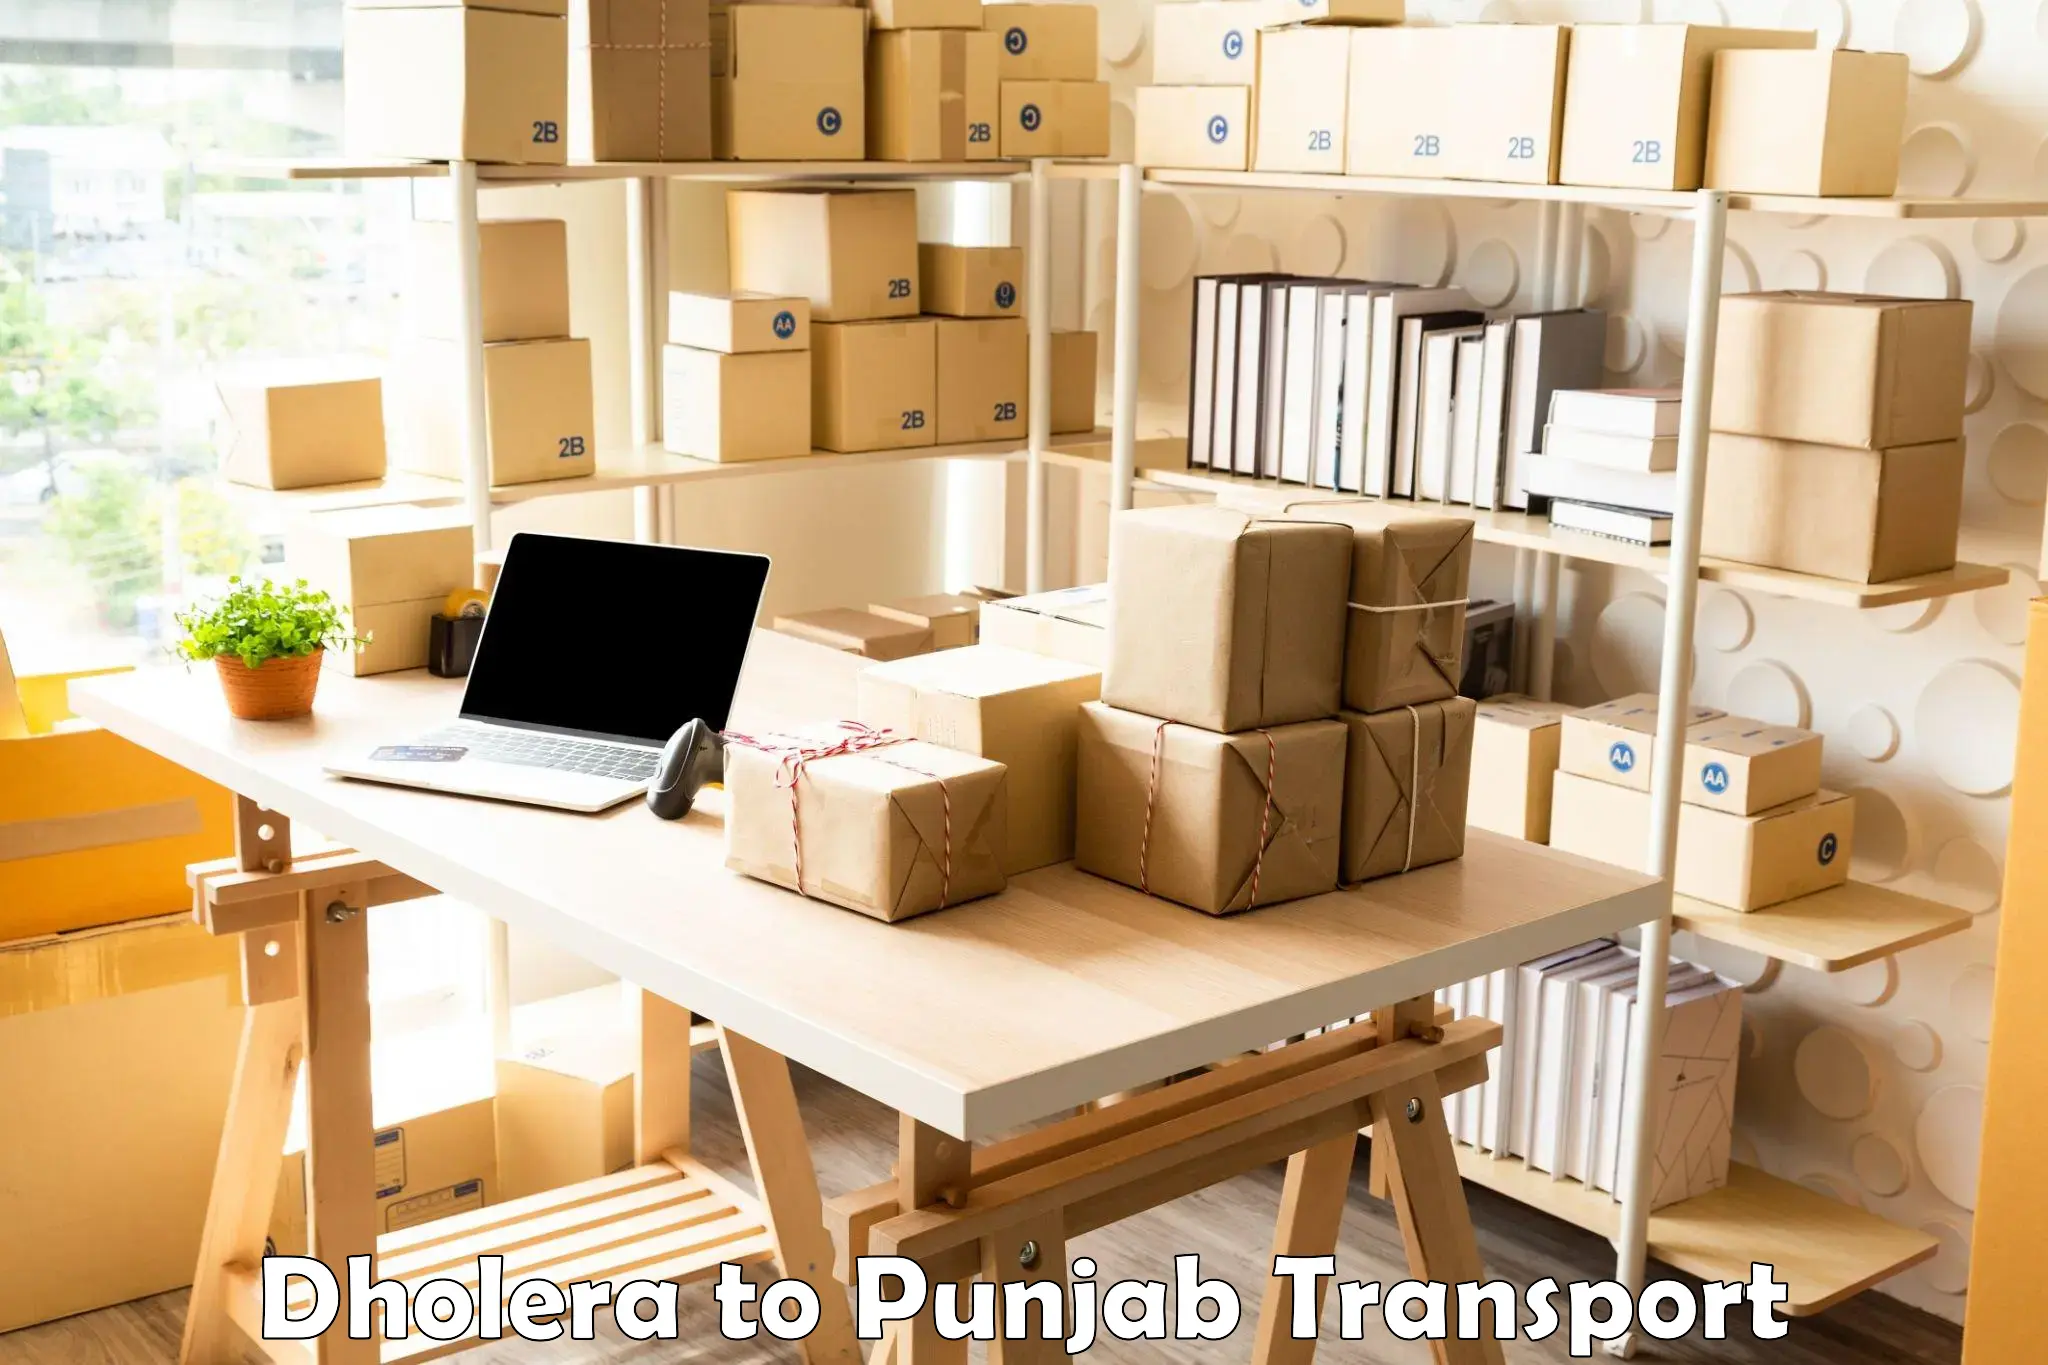 Daily transport service Dholera to Phillaur